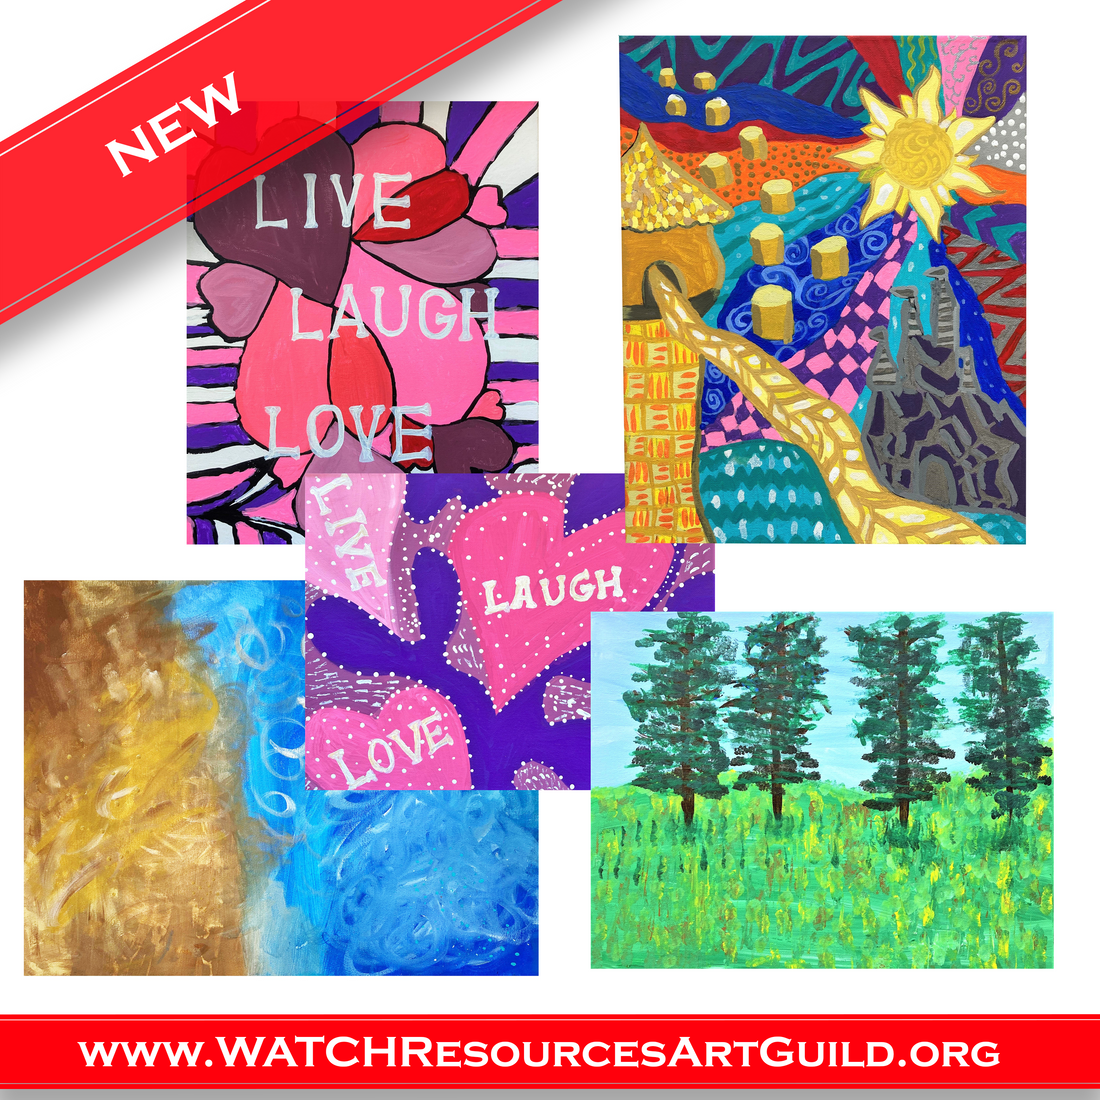 WATCH Resources Art Guild New January 2022